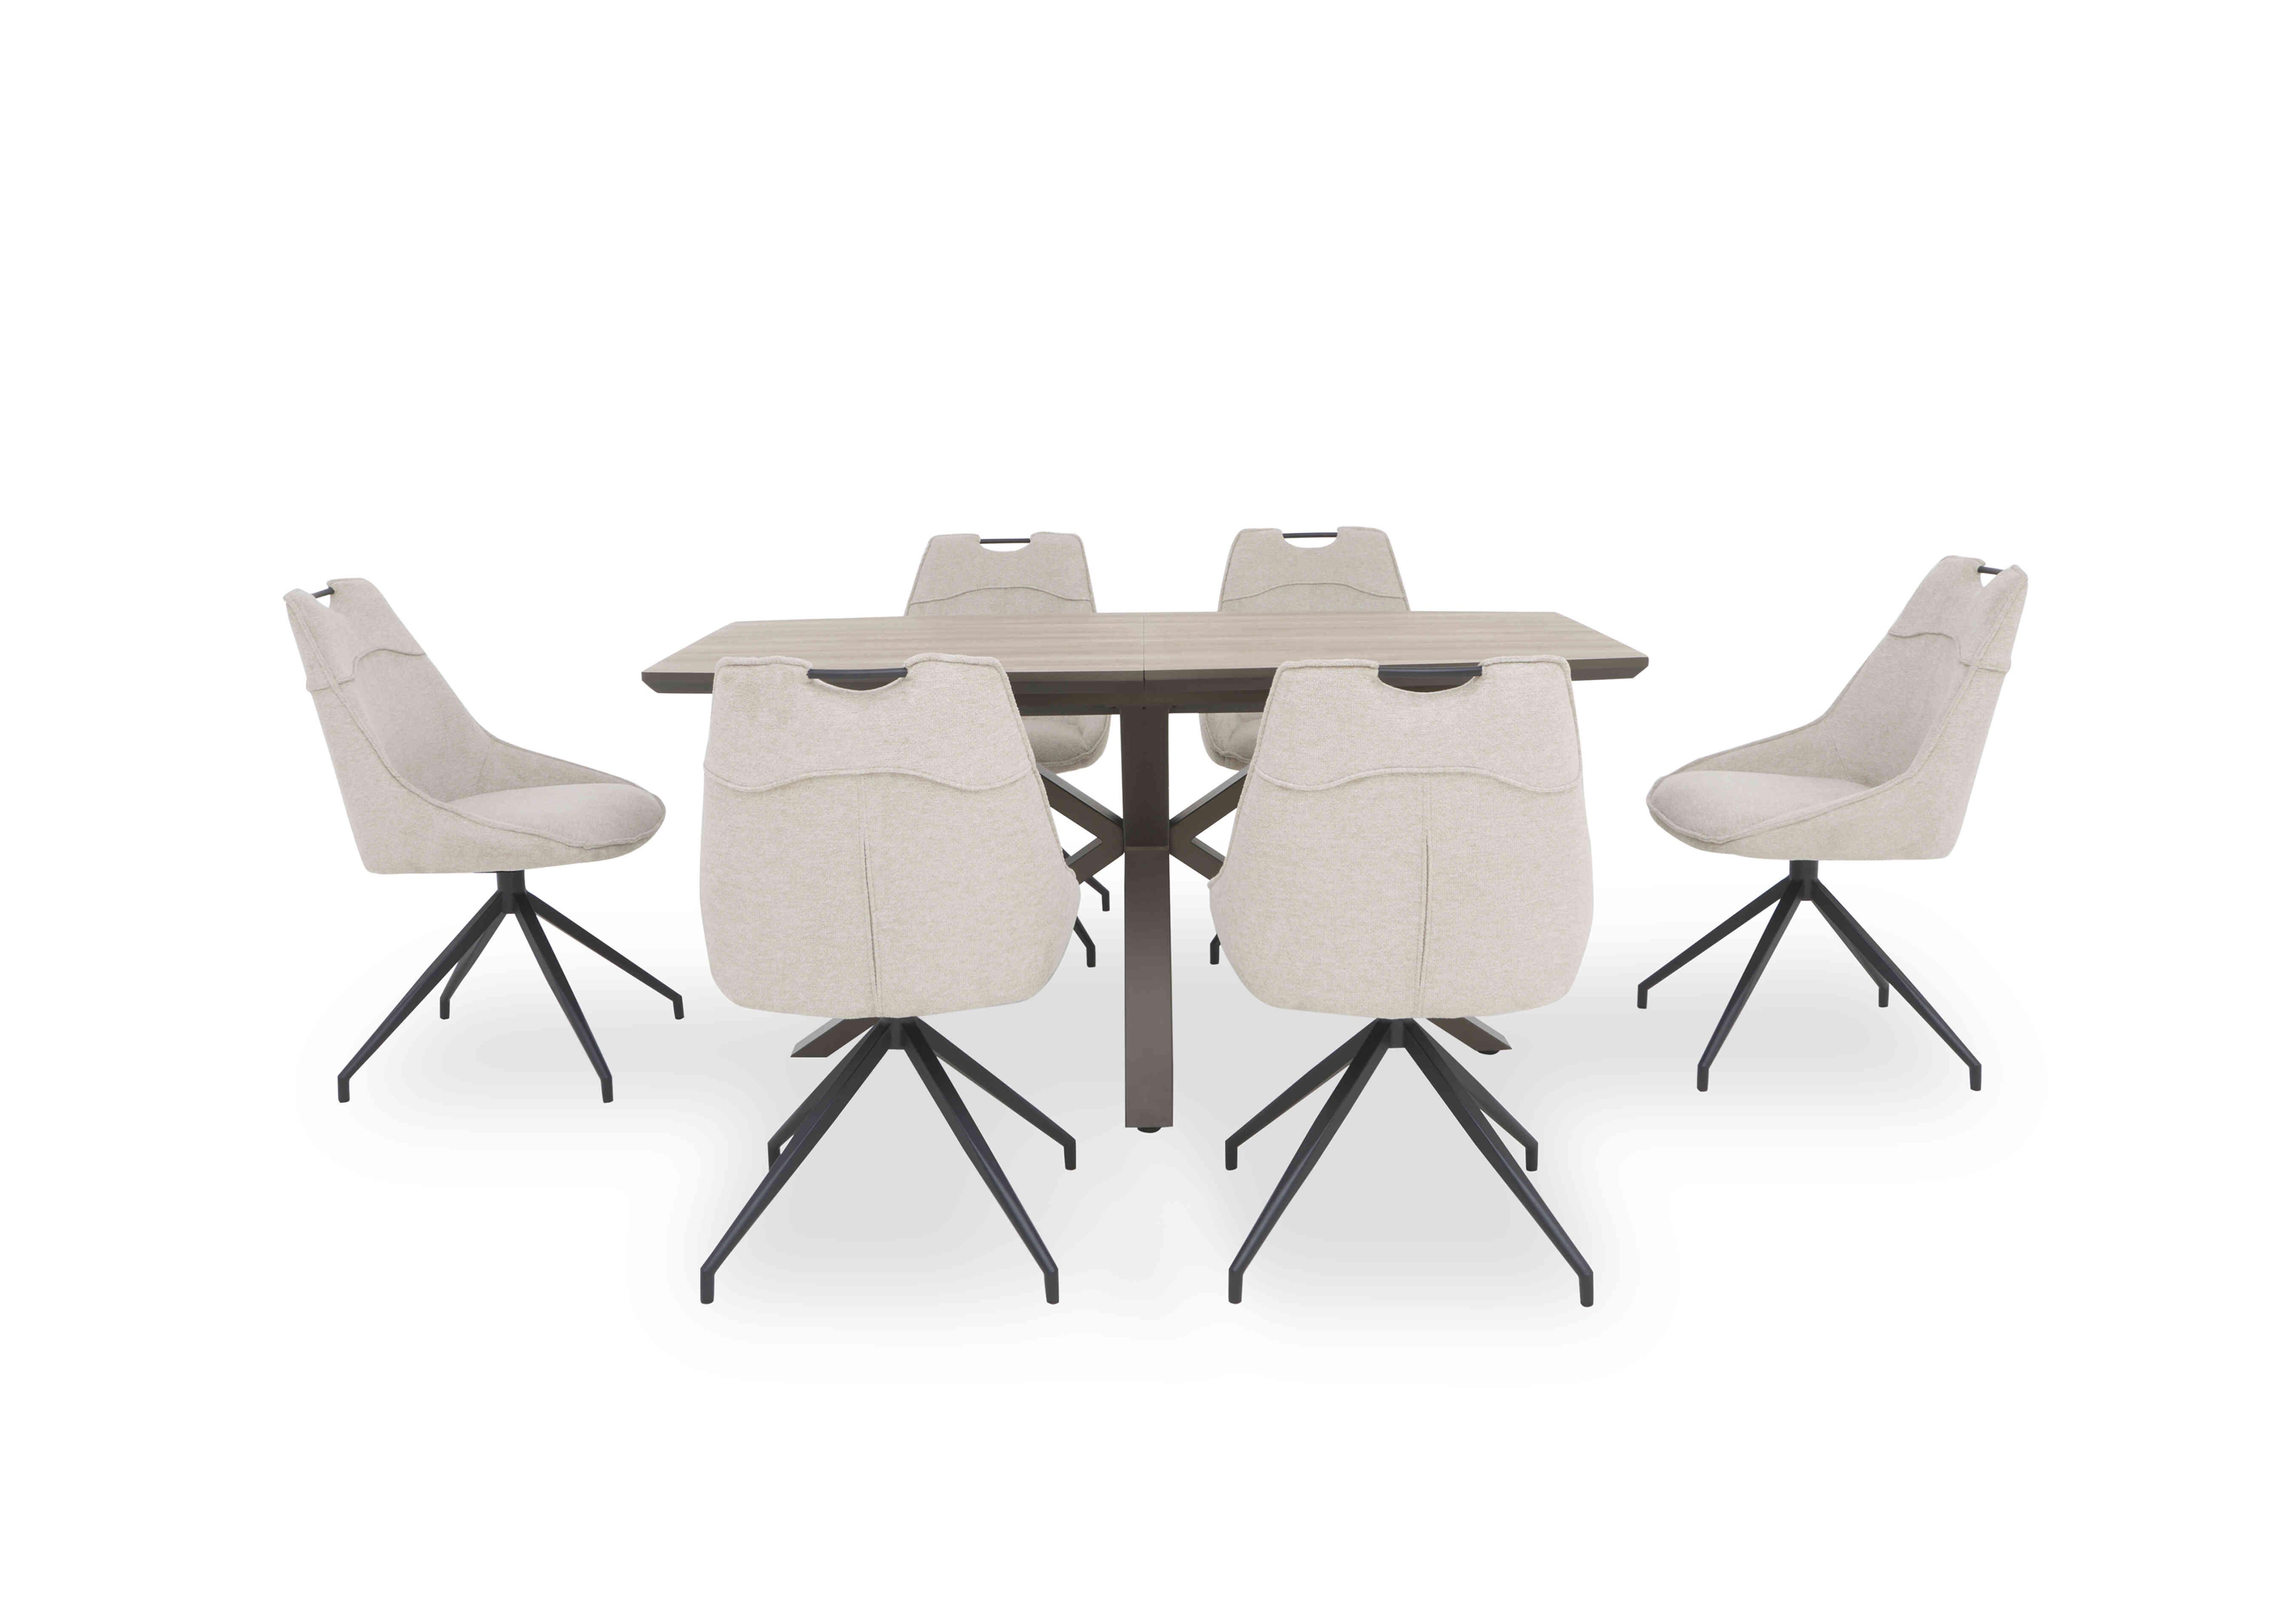 Pedro Extending Dining Table with 6 Swivel Fabric Dining Chairs in Natural on Furniture Village